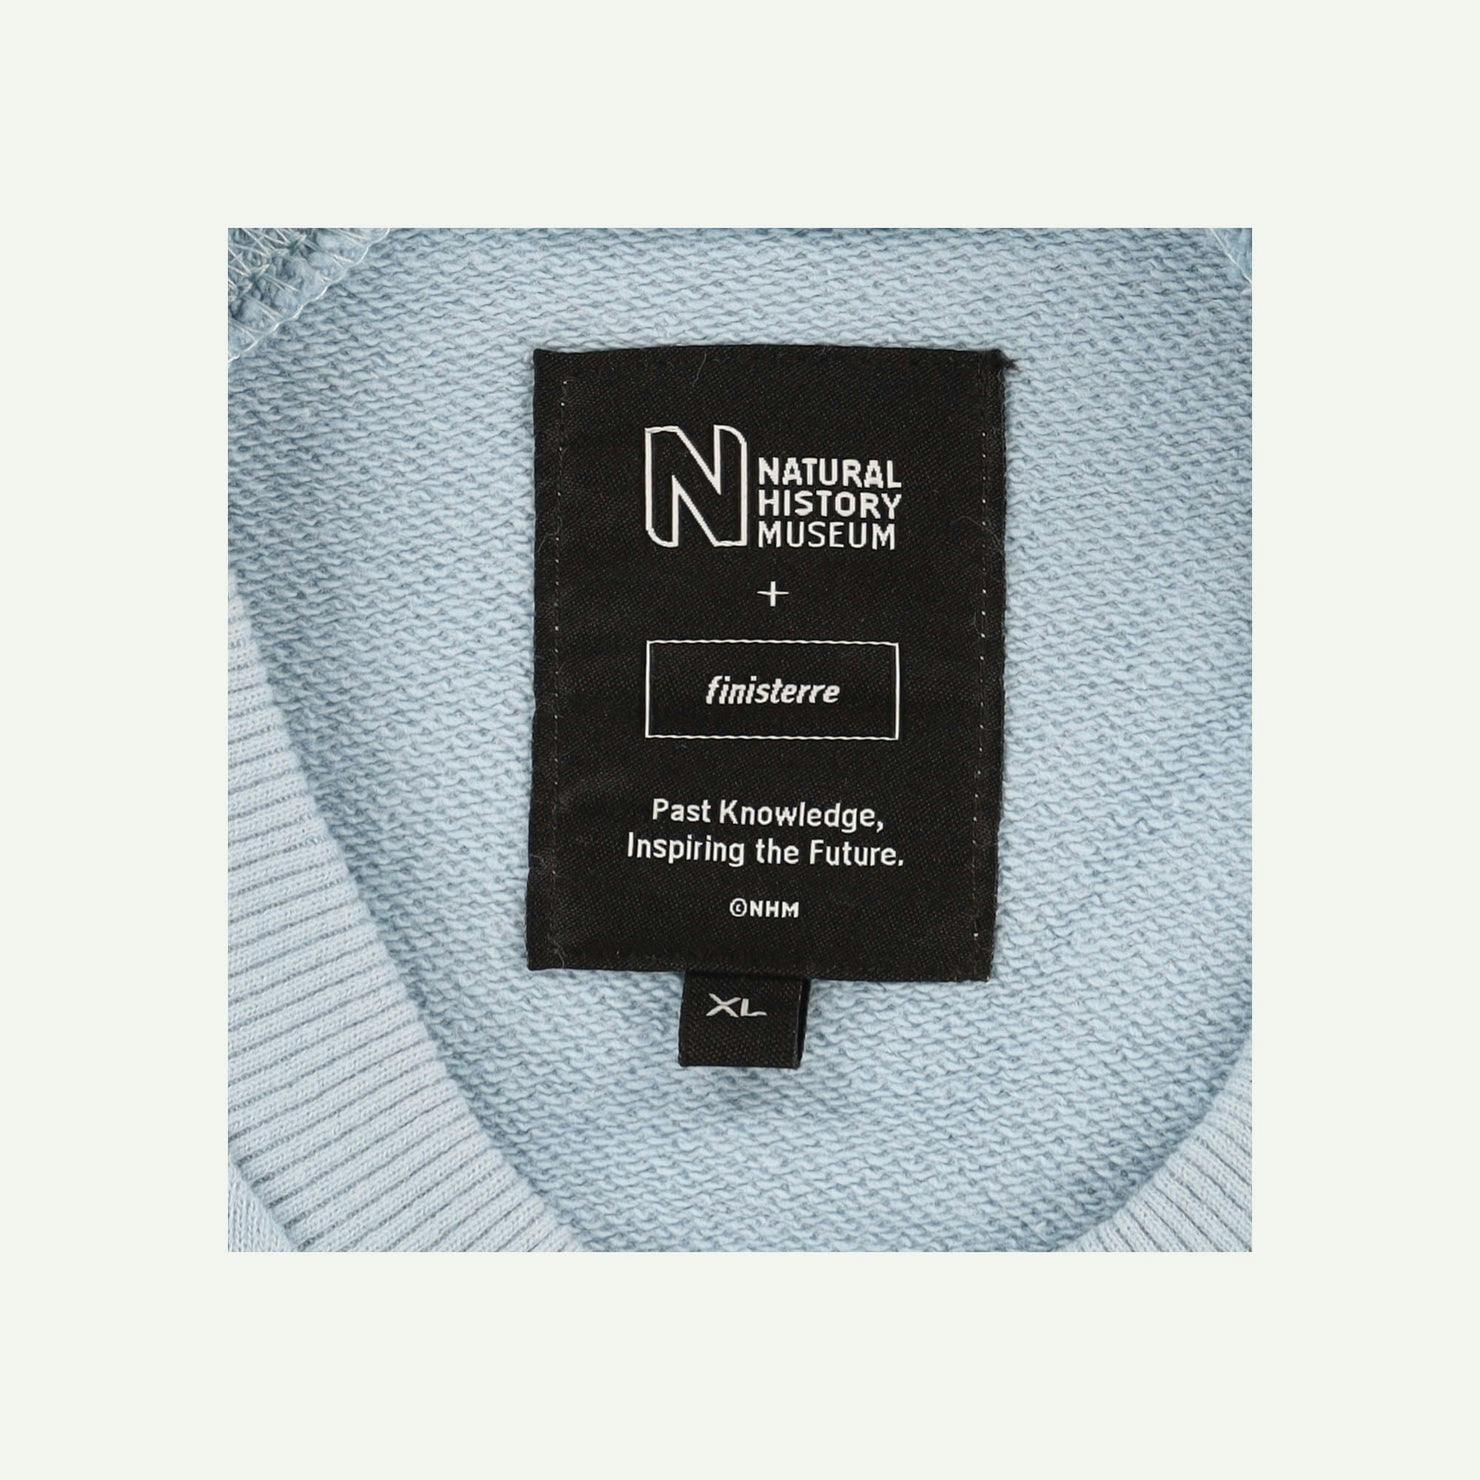 Finisterre As new Blue Jumper